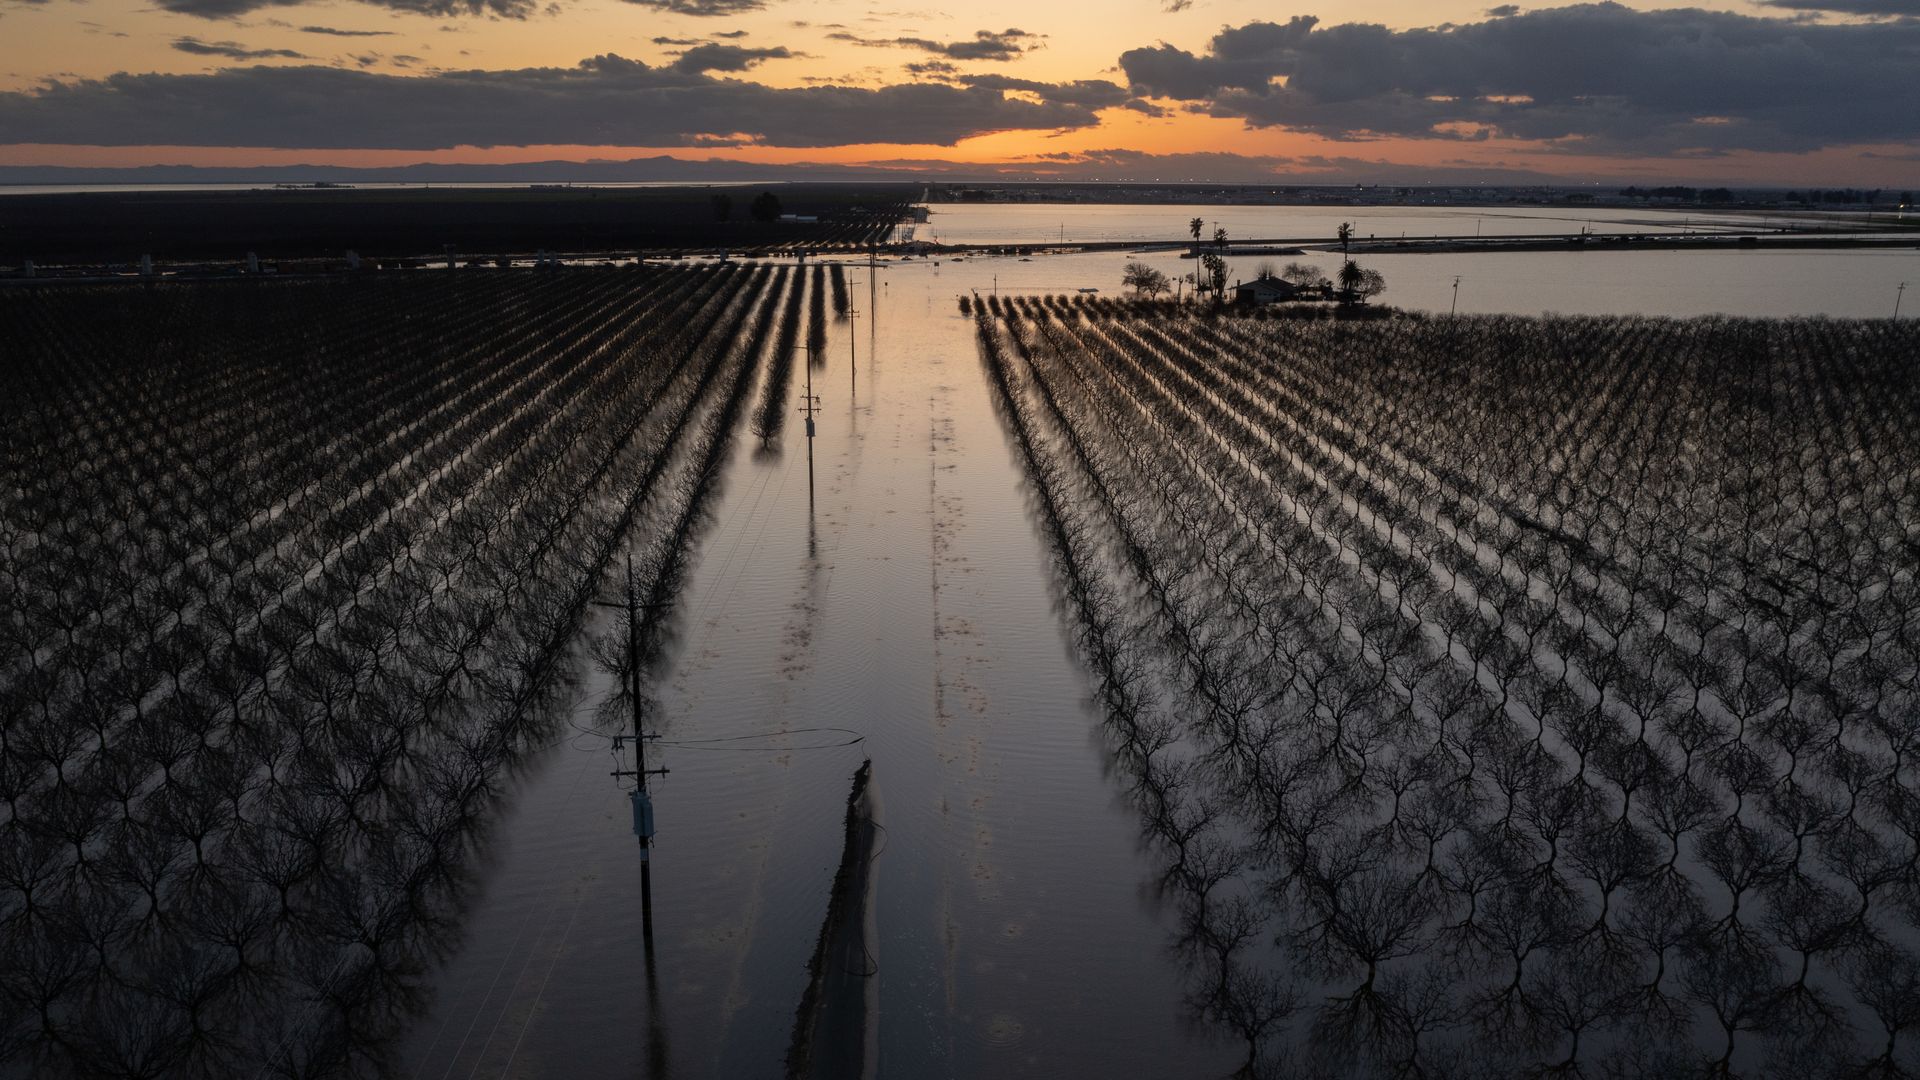 Image of floodwaters in California that are flooding agricultural land at sunset.